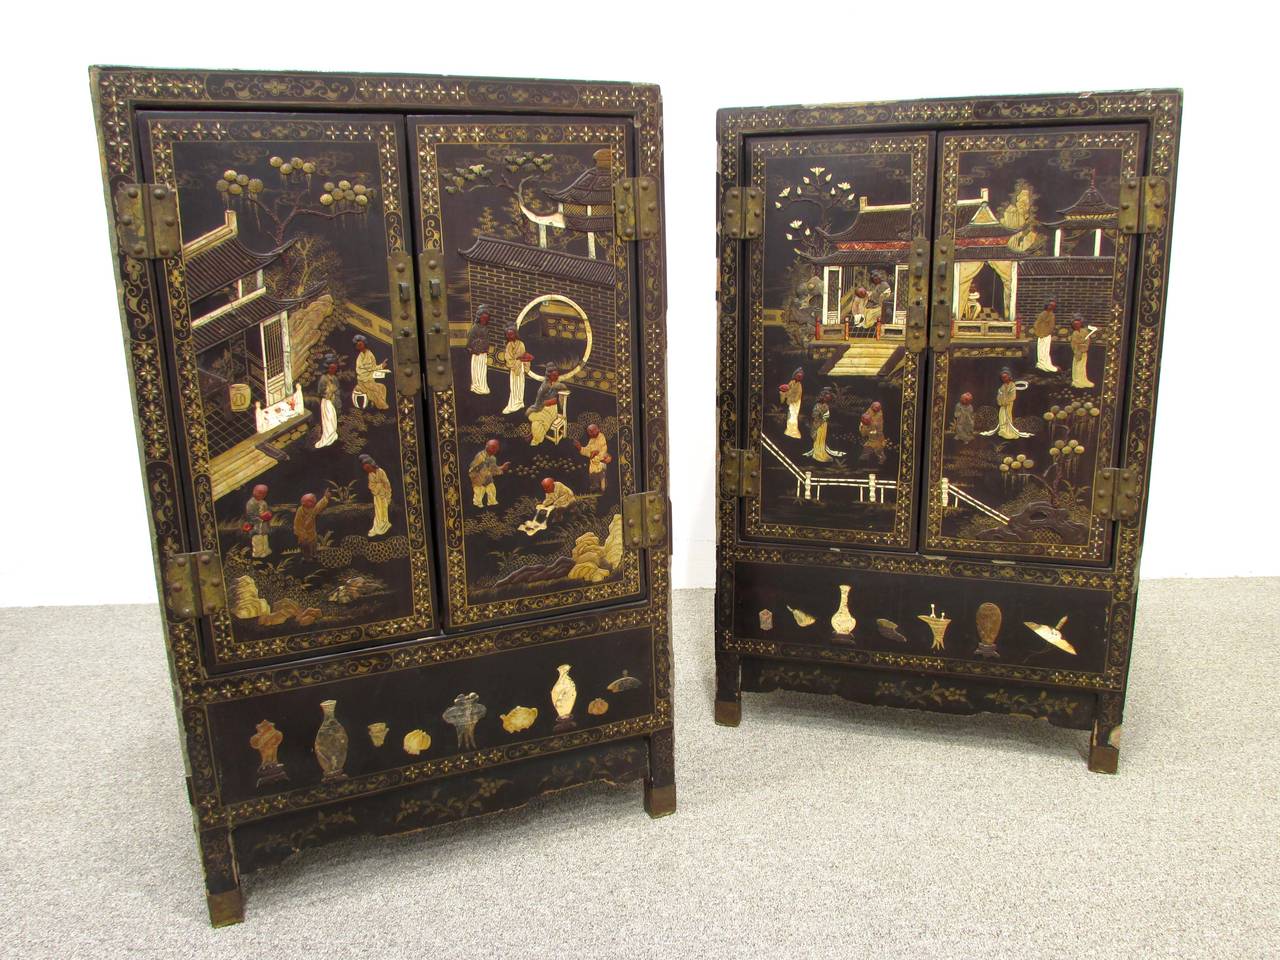 Distressed pair of black lacquered cabinets with inlaid hardstone and bone figures in palace setting with red lacquered interiors with brass accents and locks